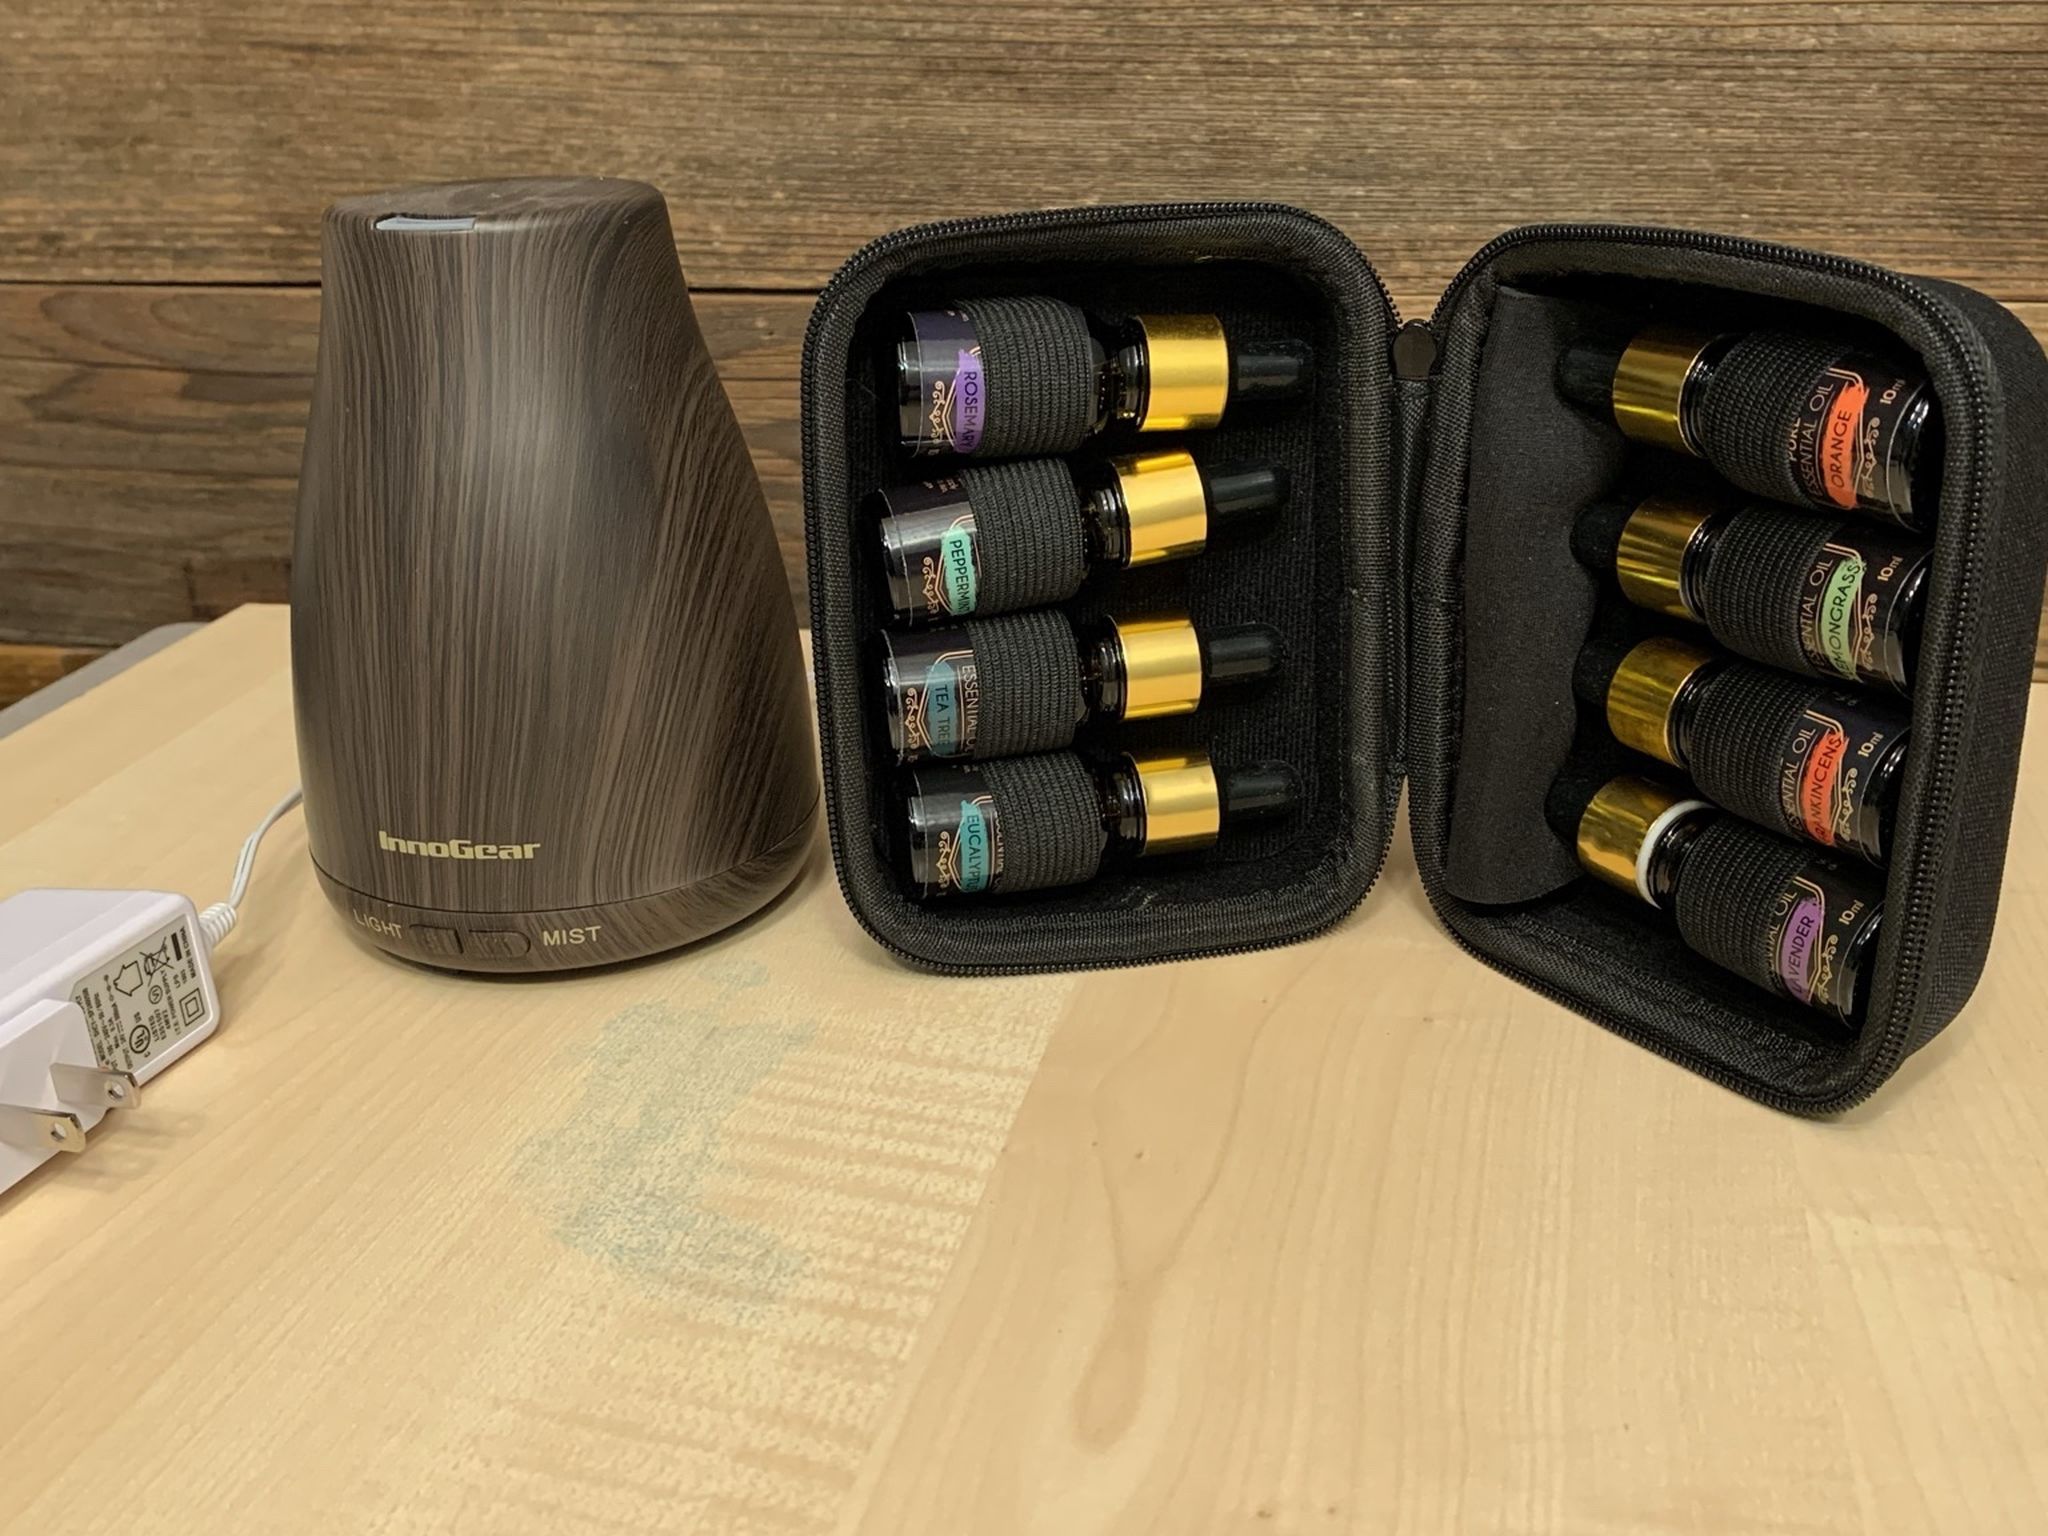 Diffuser with Ten Essential Oils and Carry Case